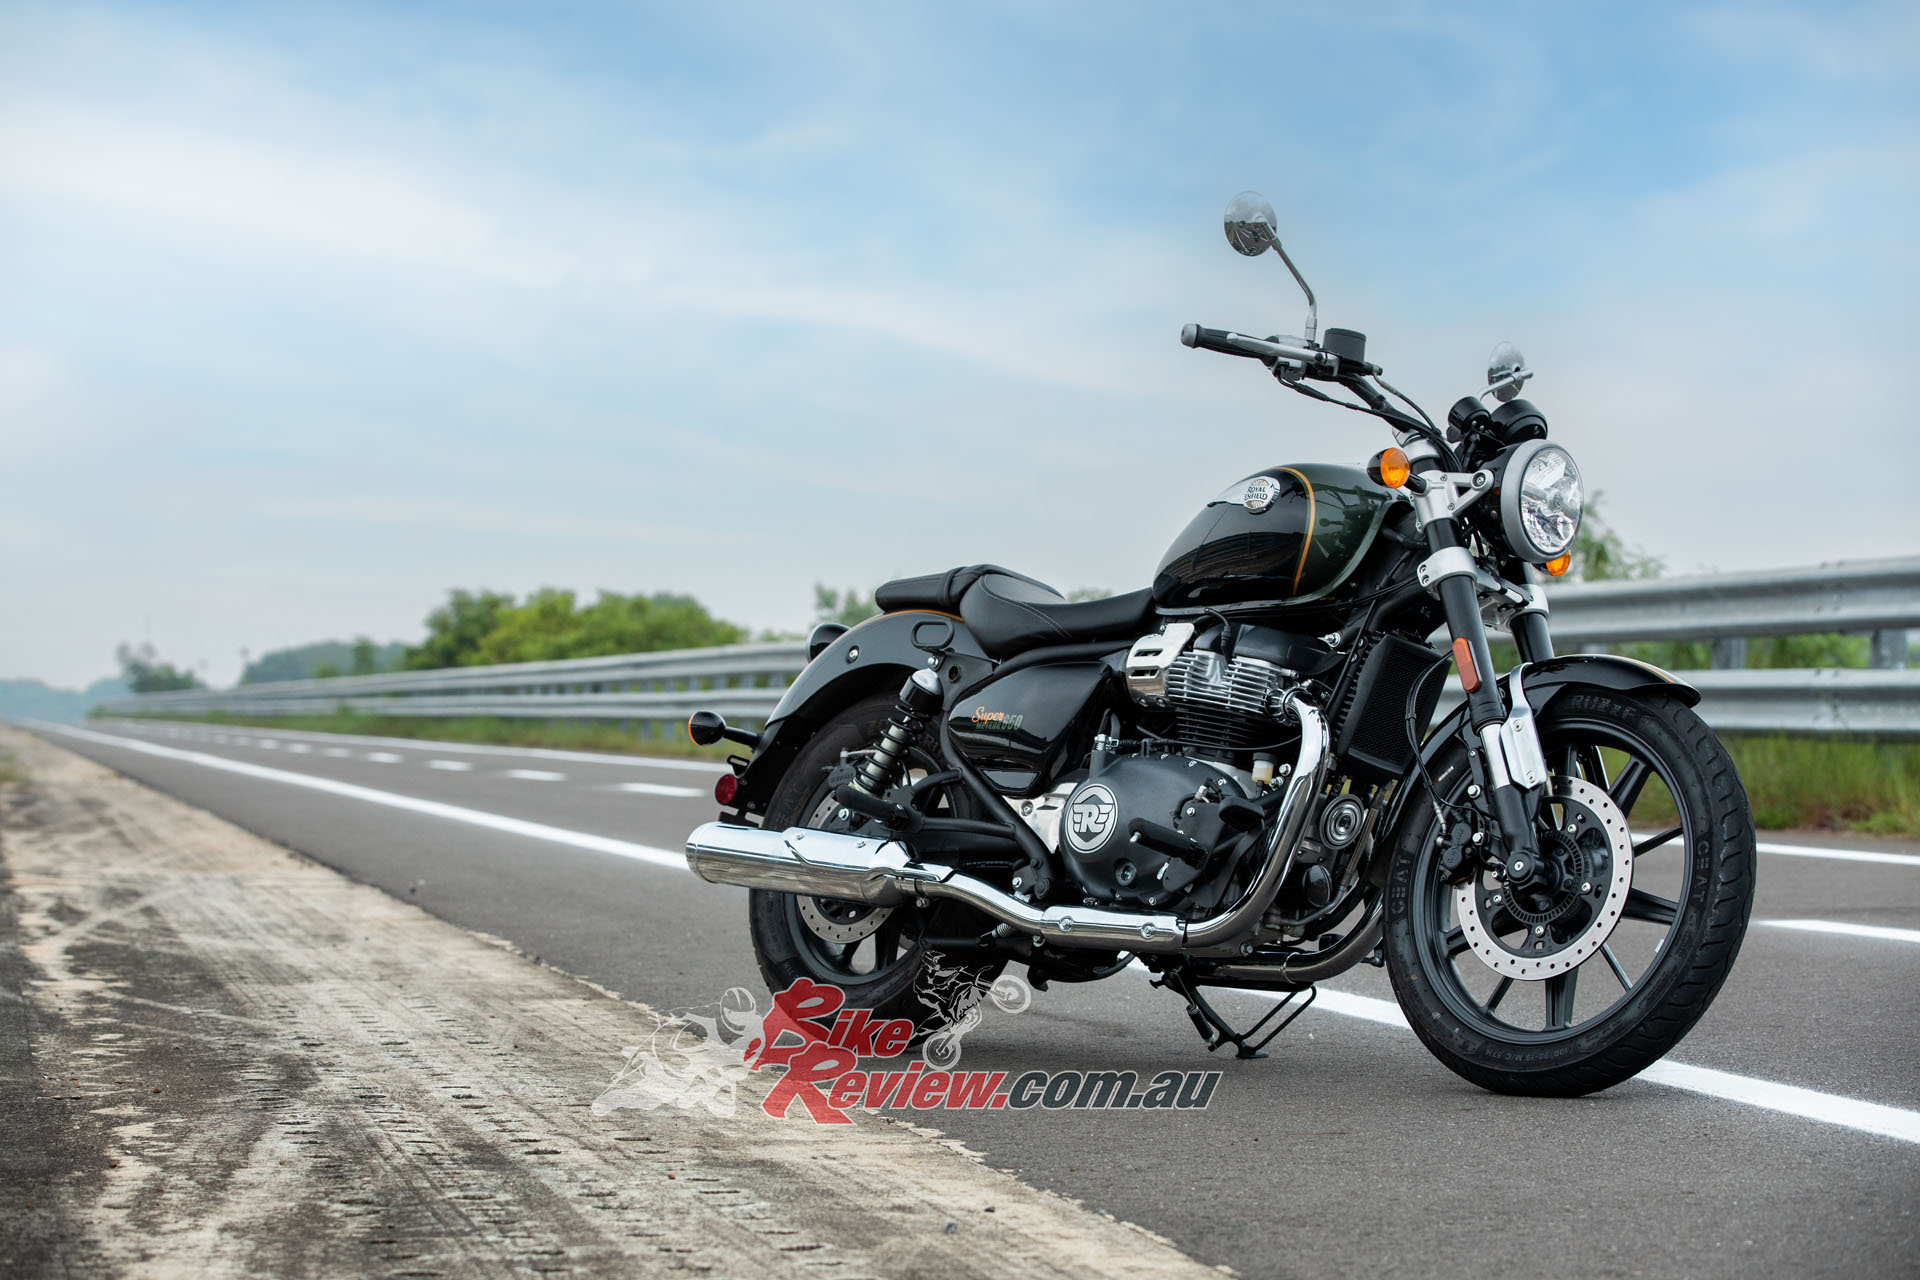 The new model is centred around the award-winning 648cc twin platform that’s been rigorously tested and, since 2018, enjoyed worldwide acclaim within the multi-award-winning Interceptor INT 650 and Continental GT 650.